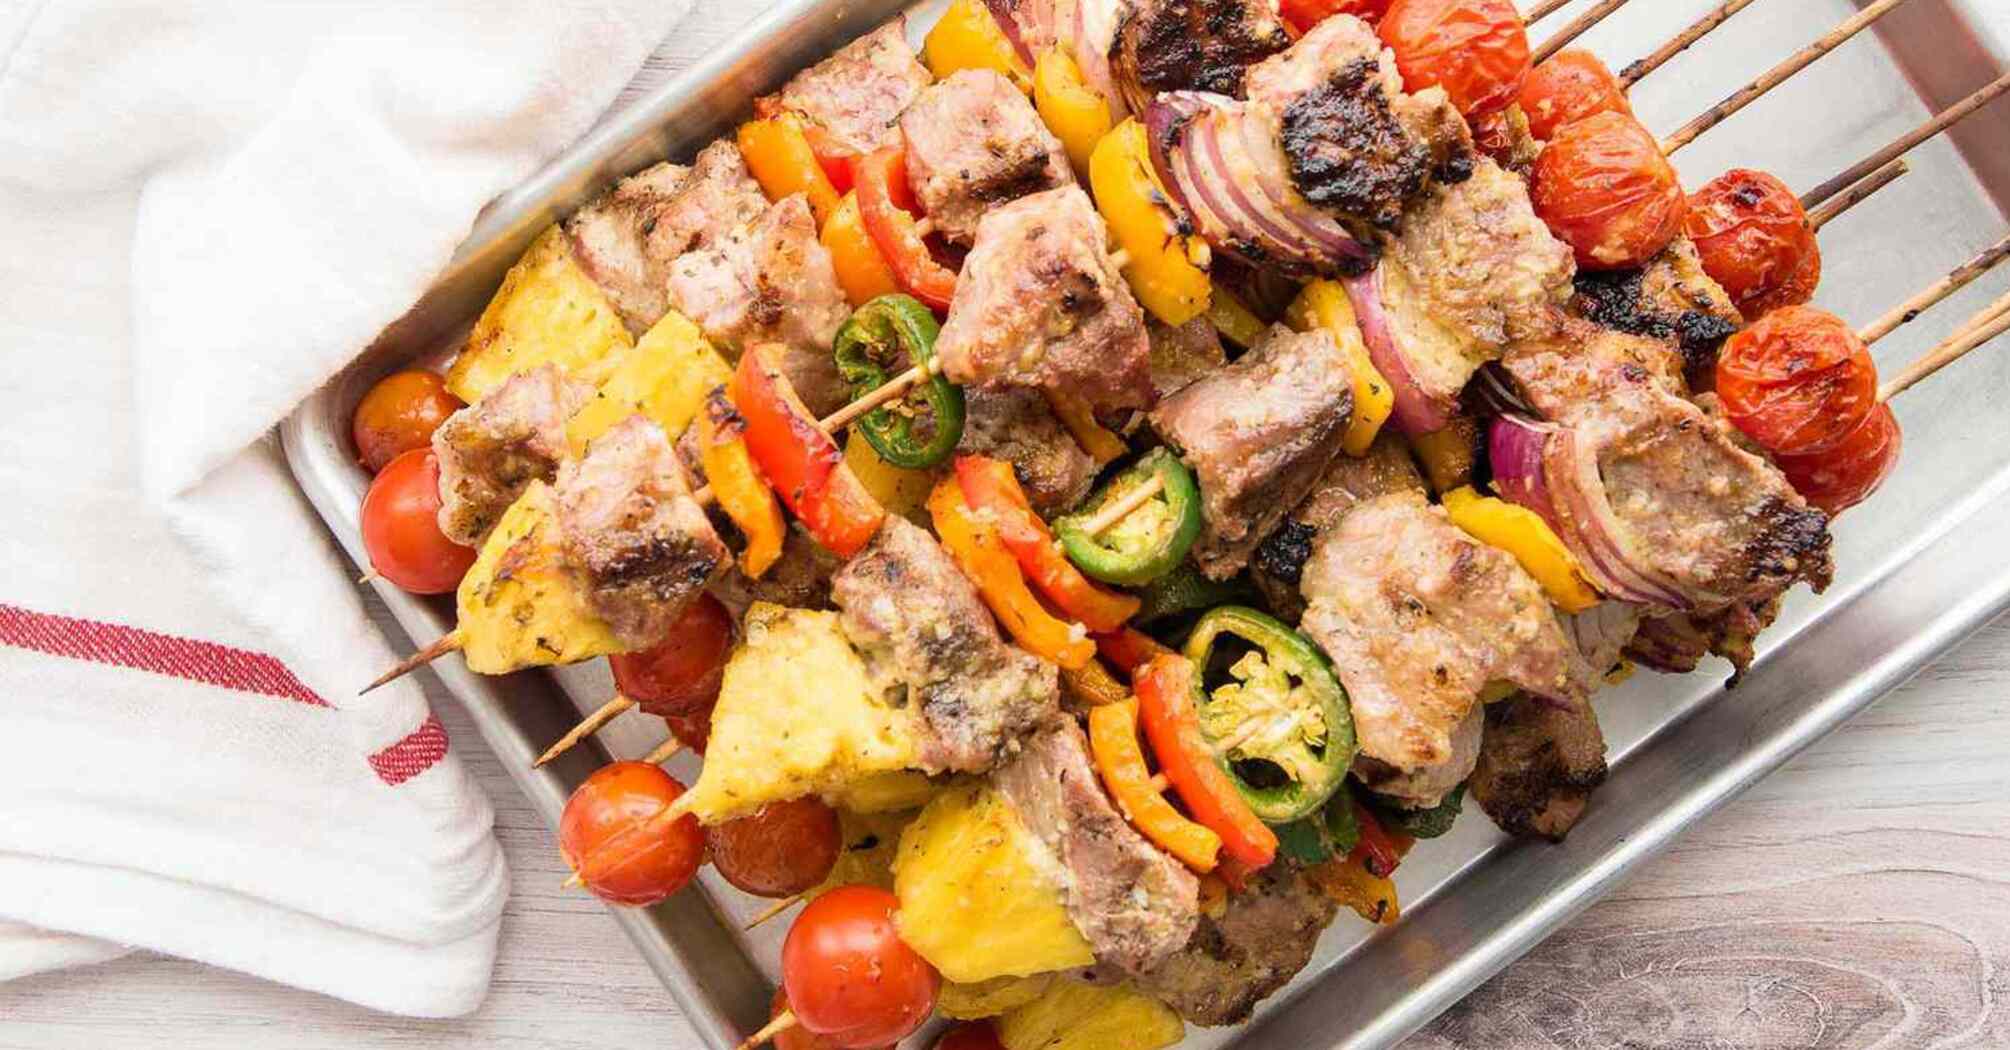 Delicious chicken kebab: what trick will help make it juicy